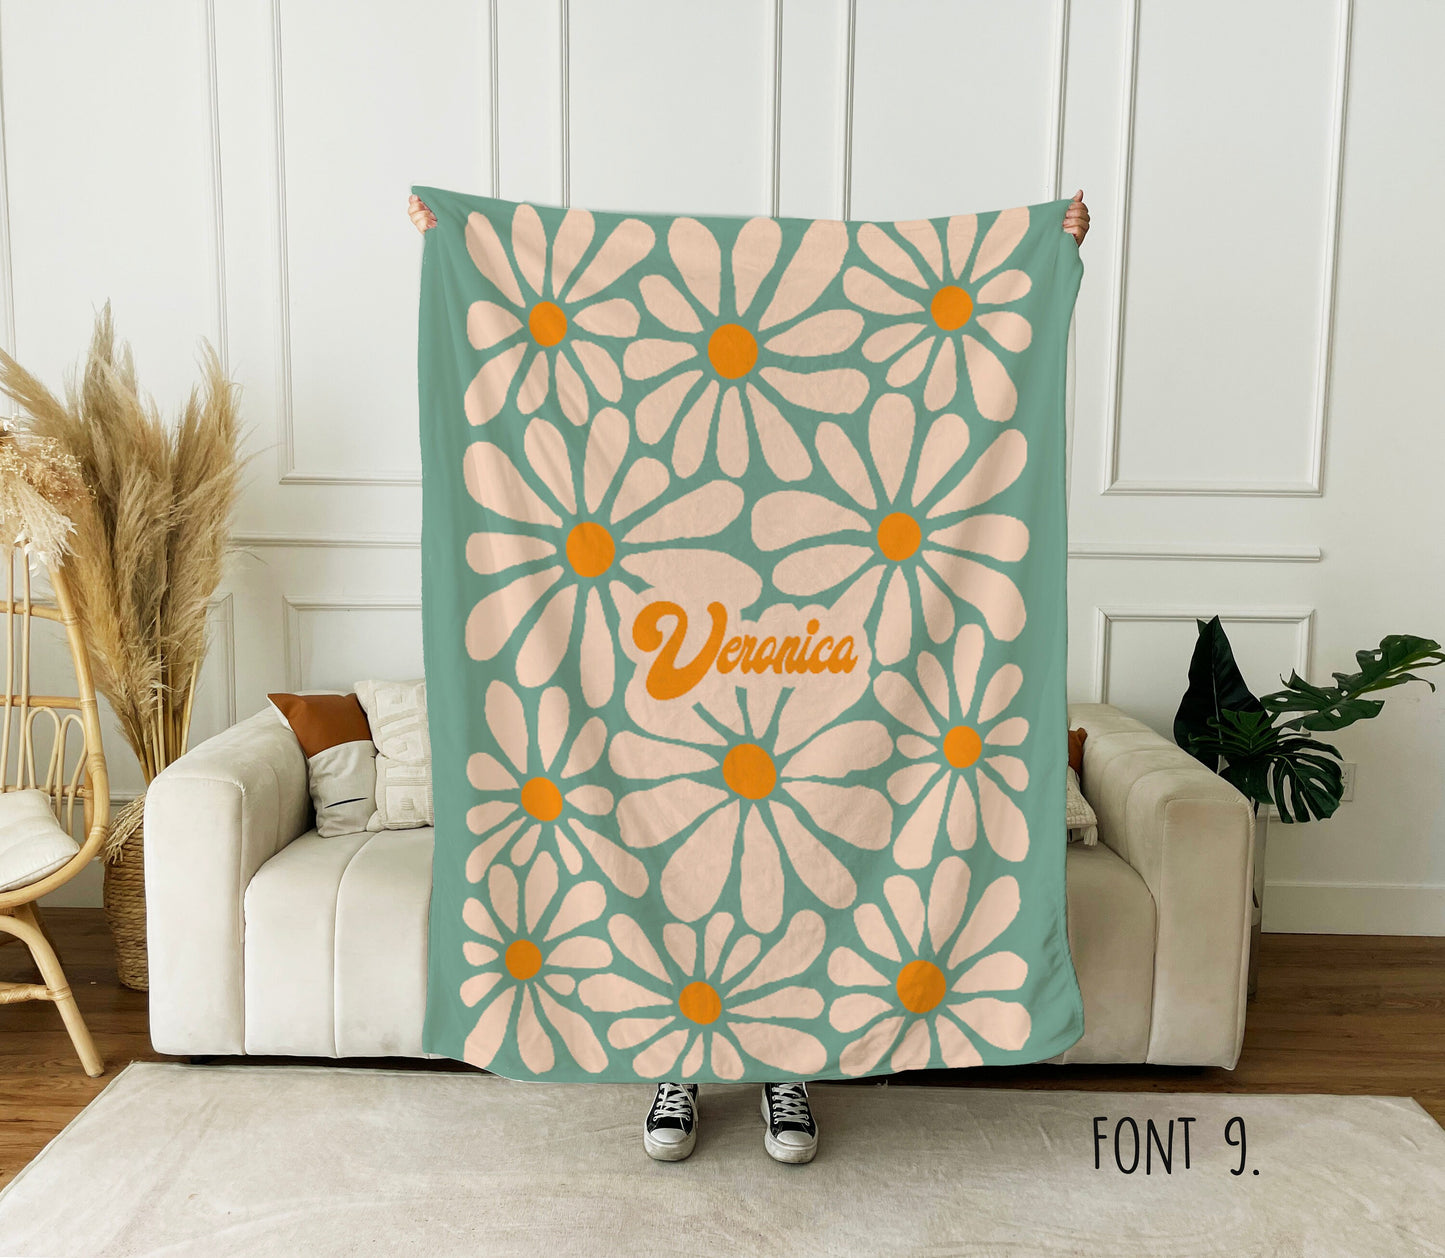 Personalized FLOWER Pattern in vintage rustic style font blanket with Name, Custom blanket gift, Birthday Anniversary Gift